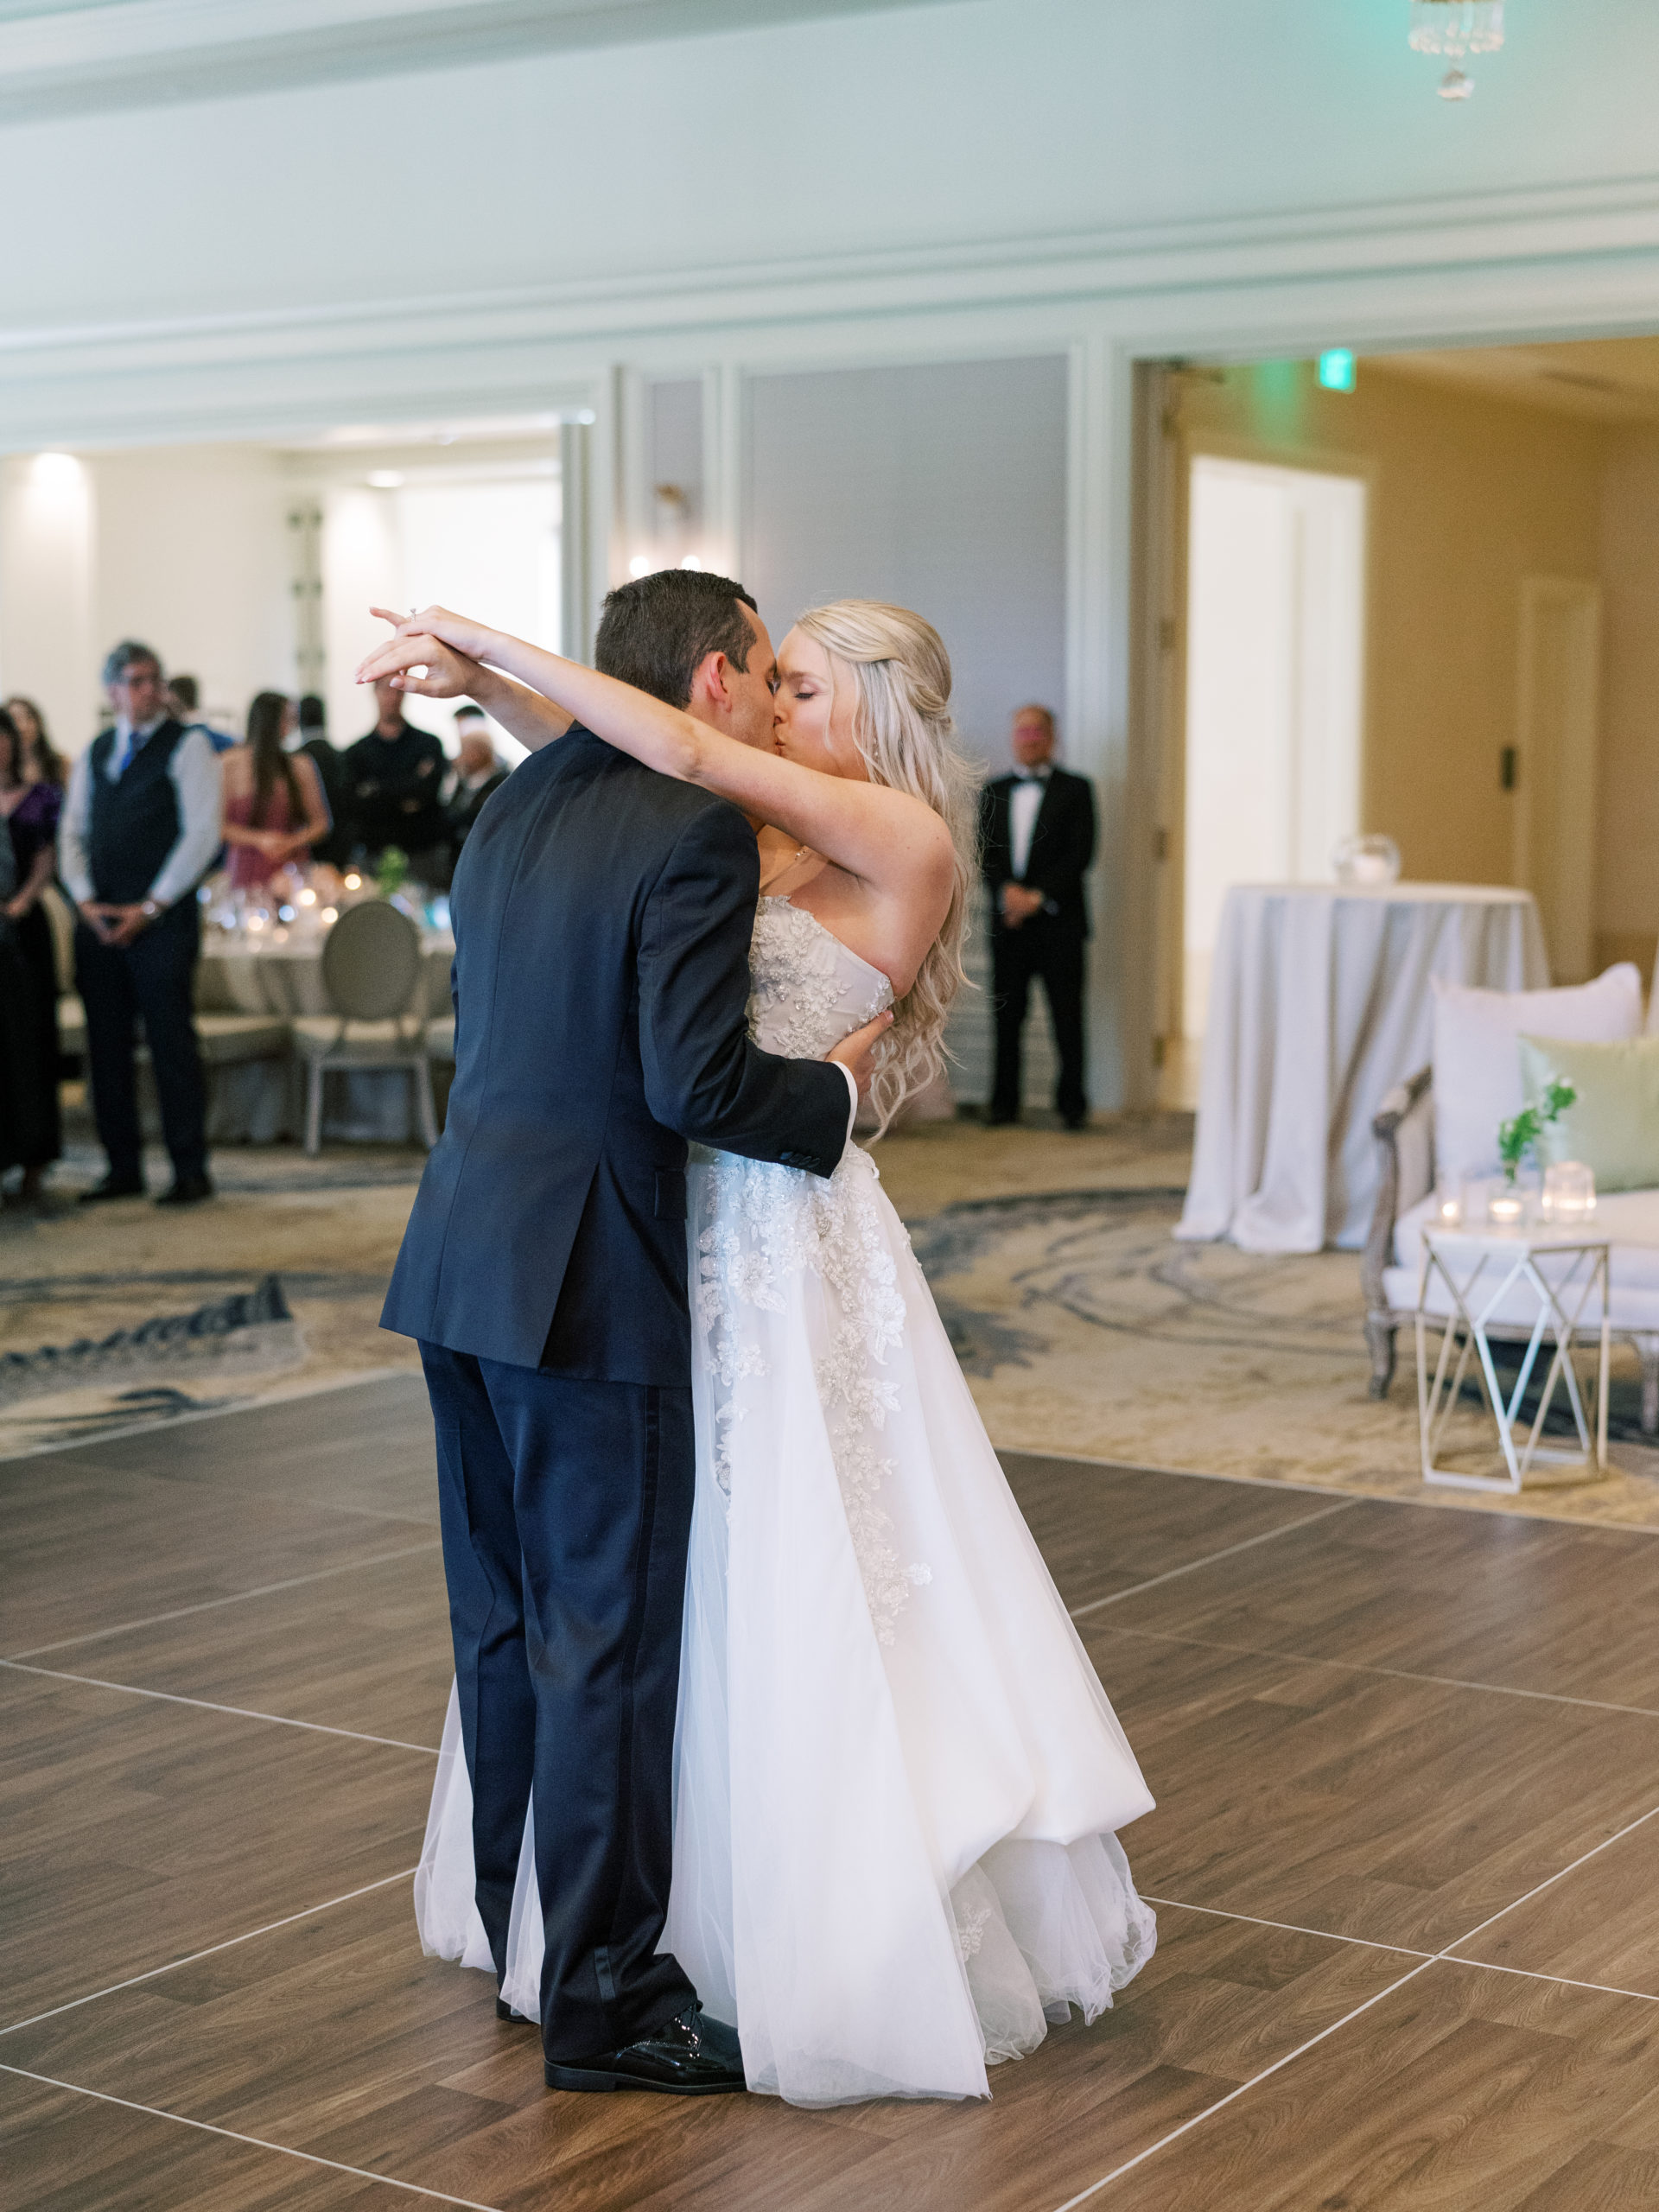 Bride and groom sharing a kiss as the slow dance on the dance floor at the Grand Ballroom in the Lakeside Country Club